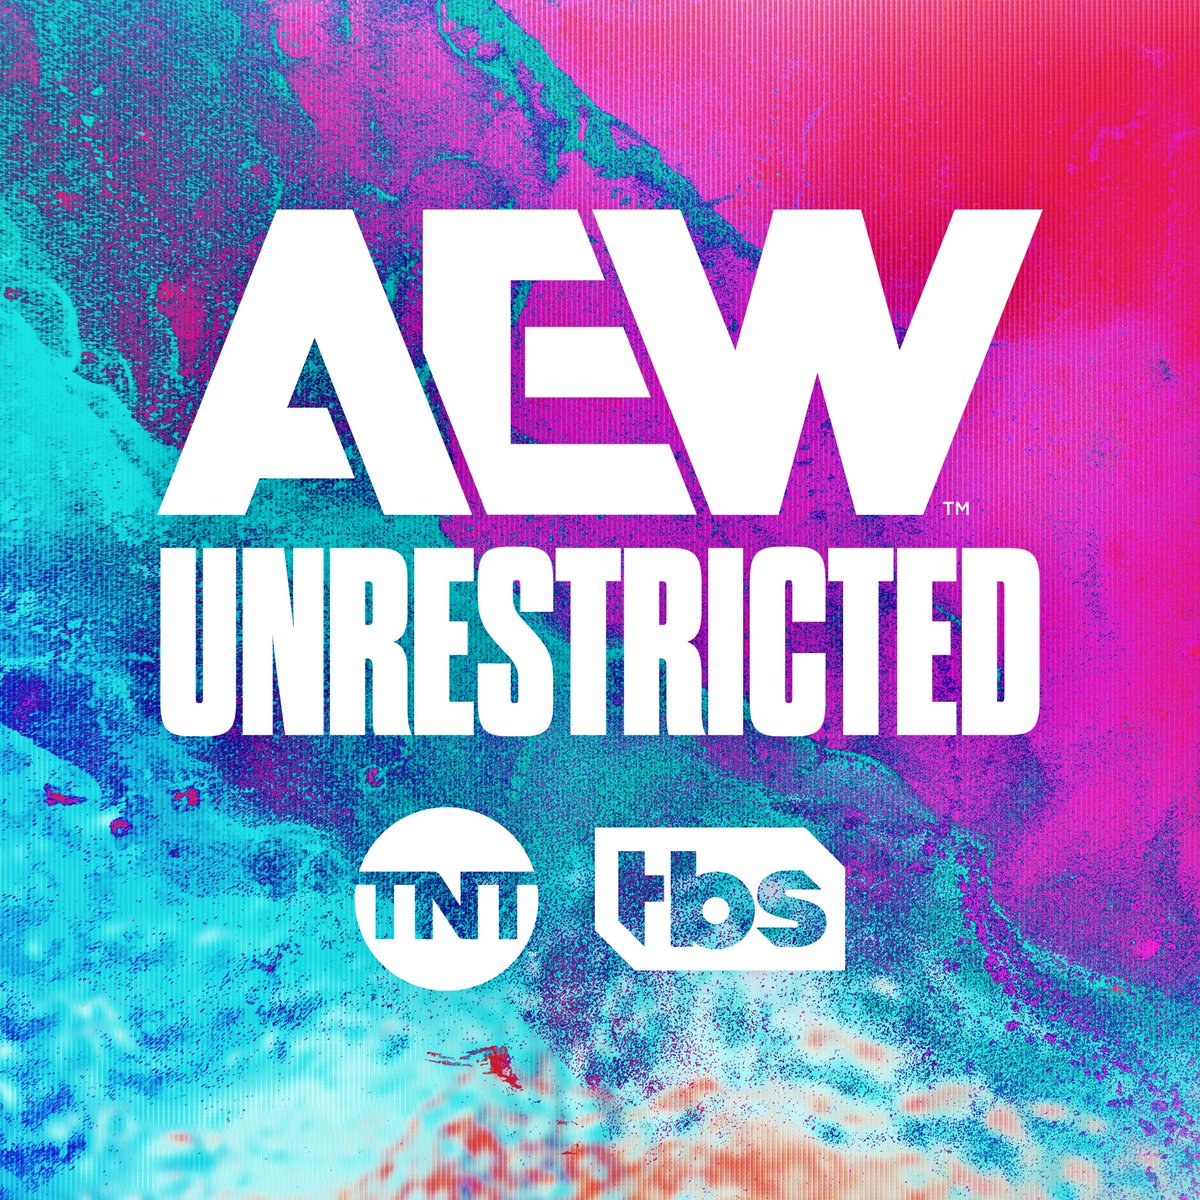 Today on #AEWUnrestricted we talk to @BillieStarkz, who clashes with @amisylle tomorrow night at #ROHSupercardOfHonor to crown the first-ever World TV Champion! We discuss the minion storyline, balancing high school & indies, wrestling in Japan+more! ▶️ link.chtbl.com/AEW